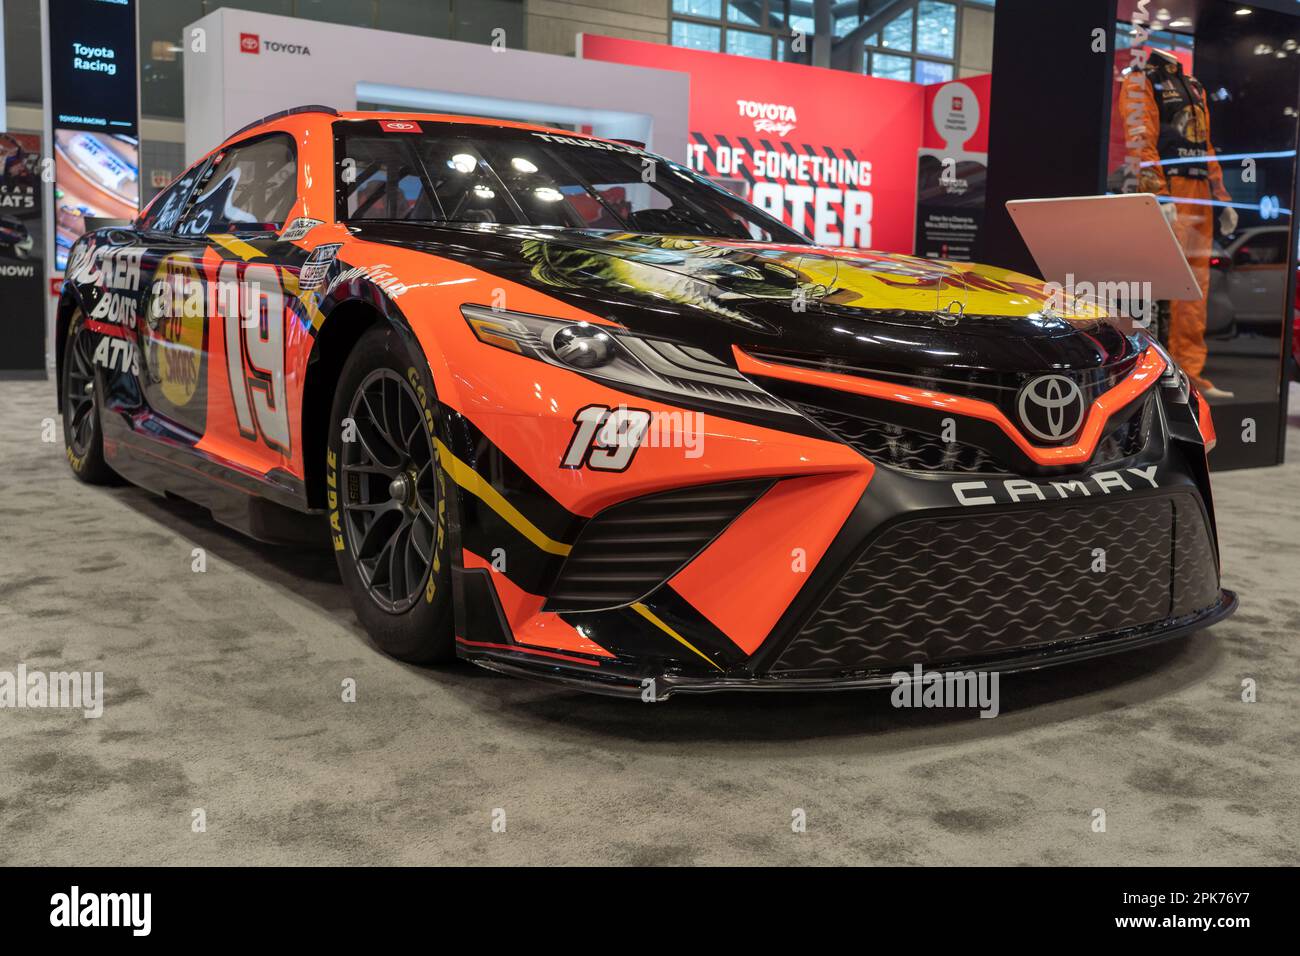 New York, United States. 05th Apr, 2023. NEW YORK, NEW YORK - APRIL 05: A Joe Gibbs Racing #19 Camry Cup Car driven by Martin Truex Jr. seen at the International Auto Show press preview at the Jacob Javits Convention Center on April 5, 2023 in New York City. Credit: Ron Adar/Alamy Live News Stock Photo